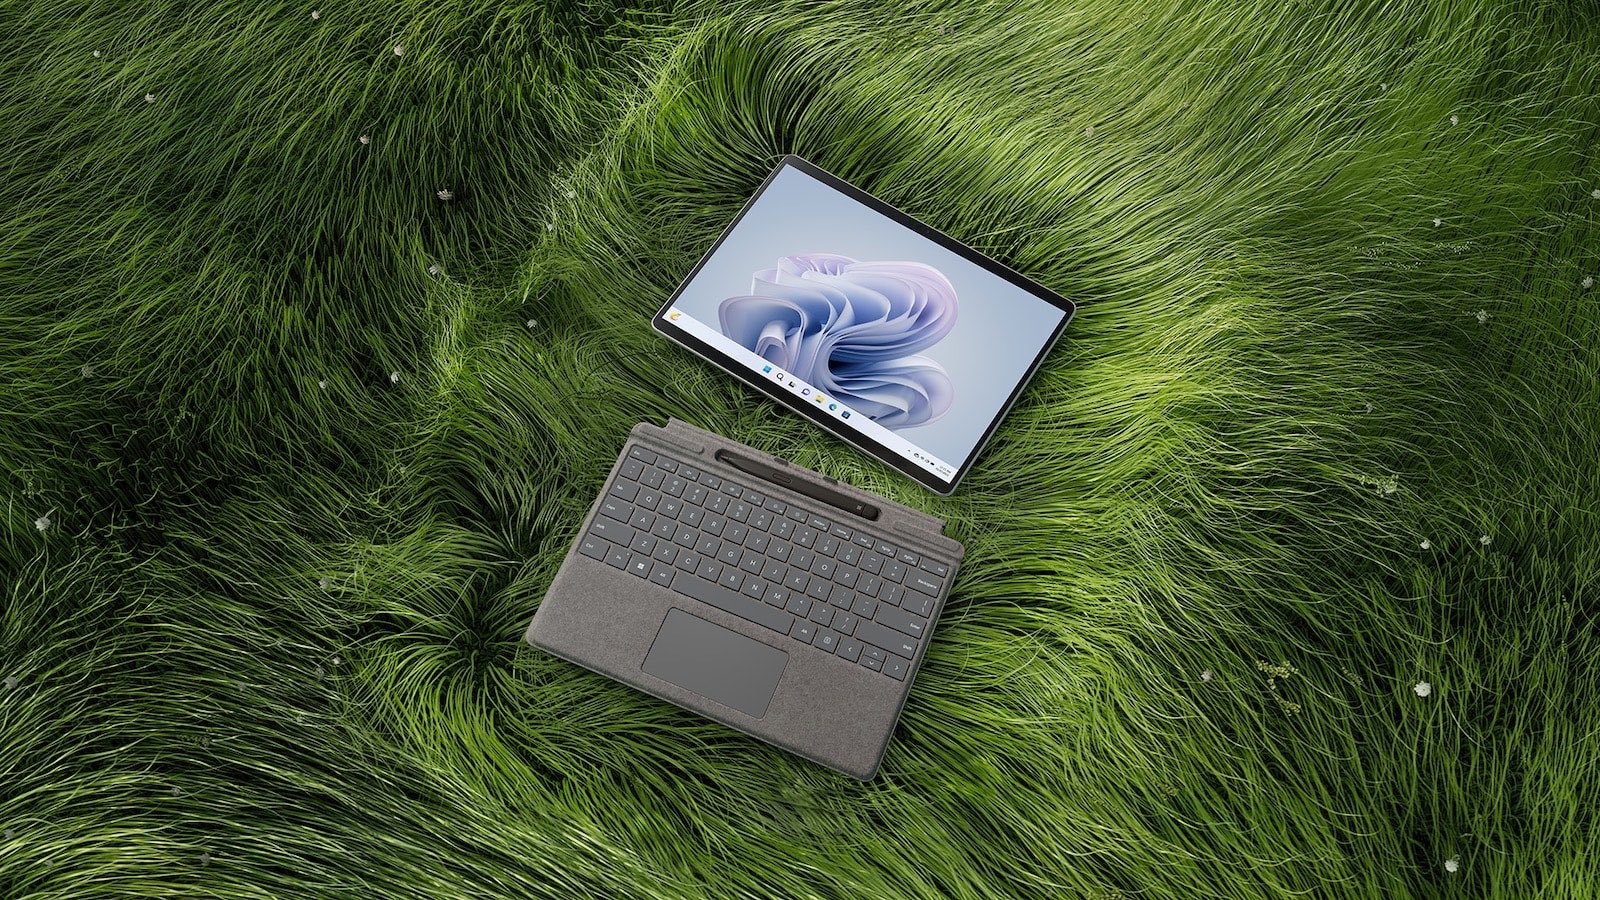 Microsoft Surface Pro 9 versatile tablet is together a powerful laptop, tablet & studio